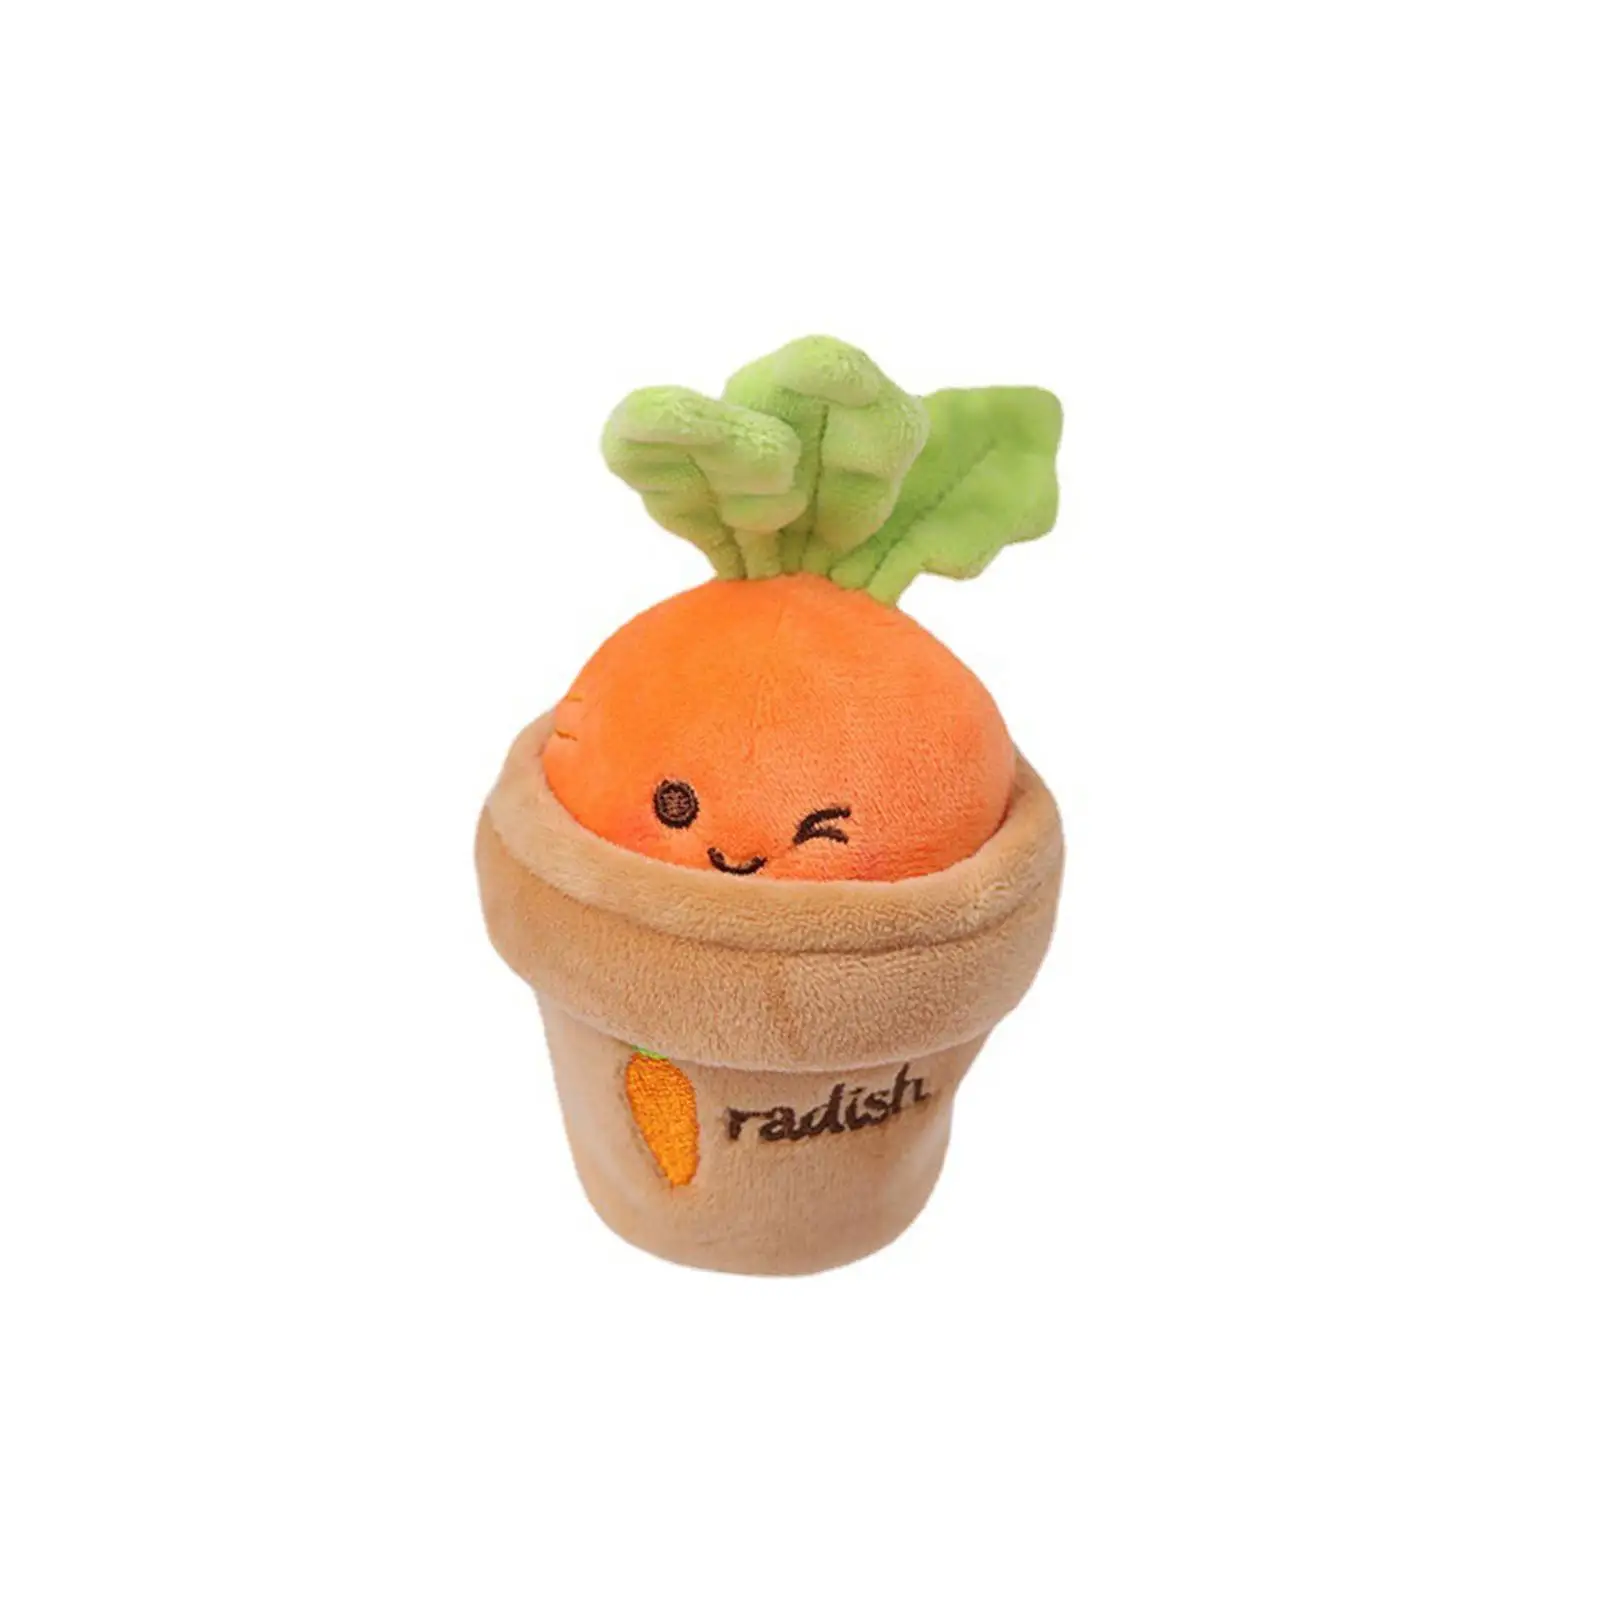 Carrot Plush Toy Keychain Pulling Radish Toy Vegetable Figure Funny Soft Play